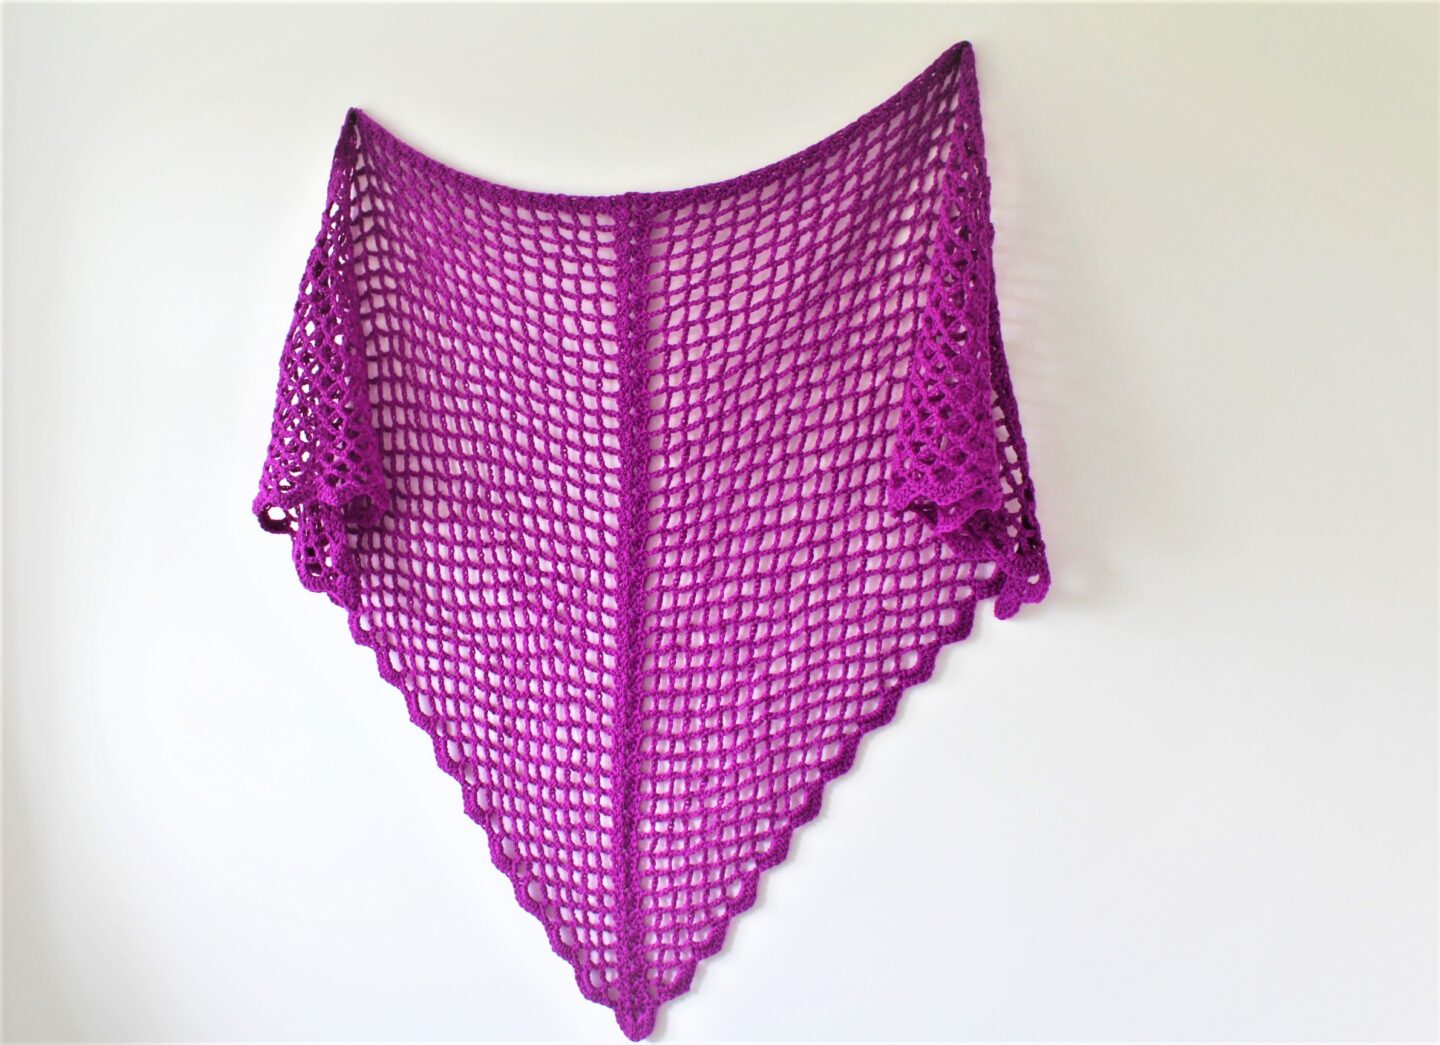 Side view of this free crochet pattern